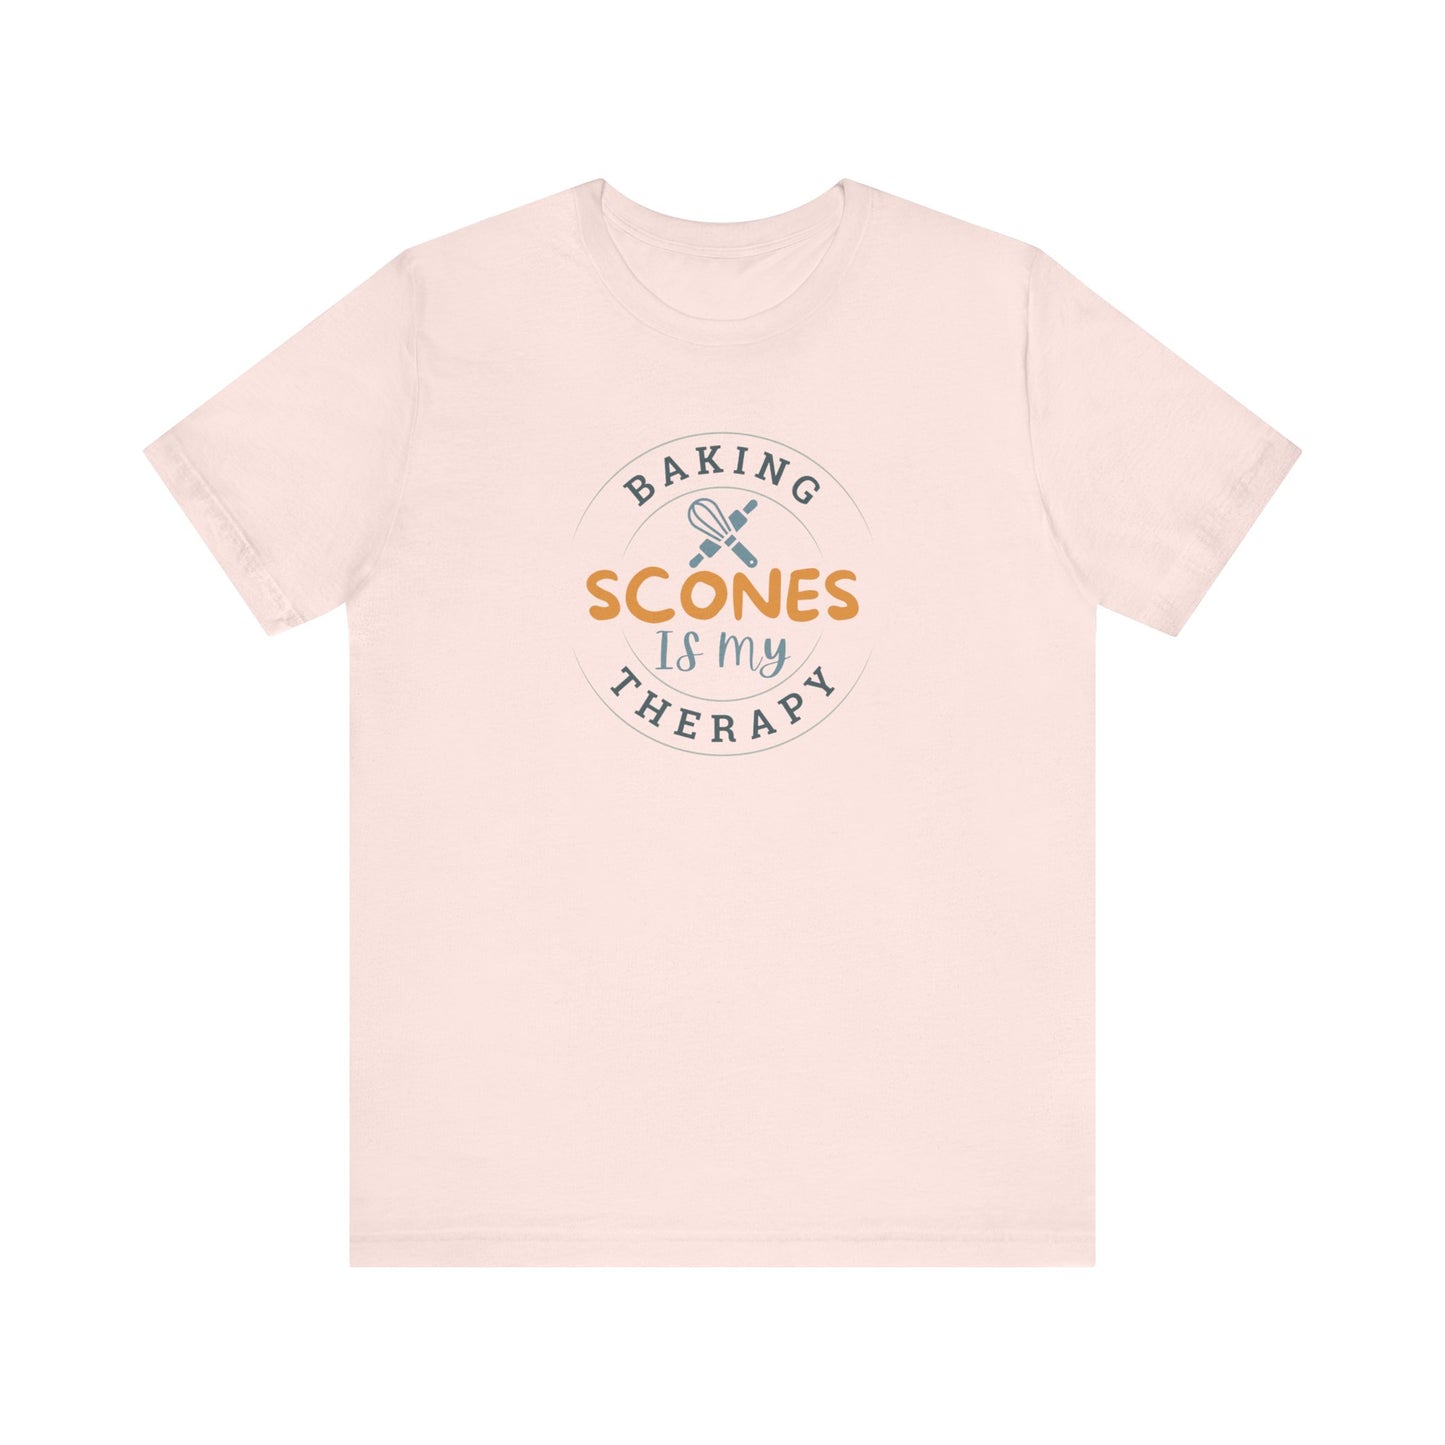 Baking Scones is My Therapy T-Shirt